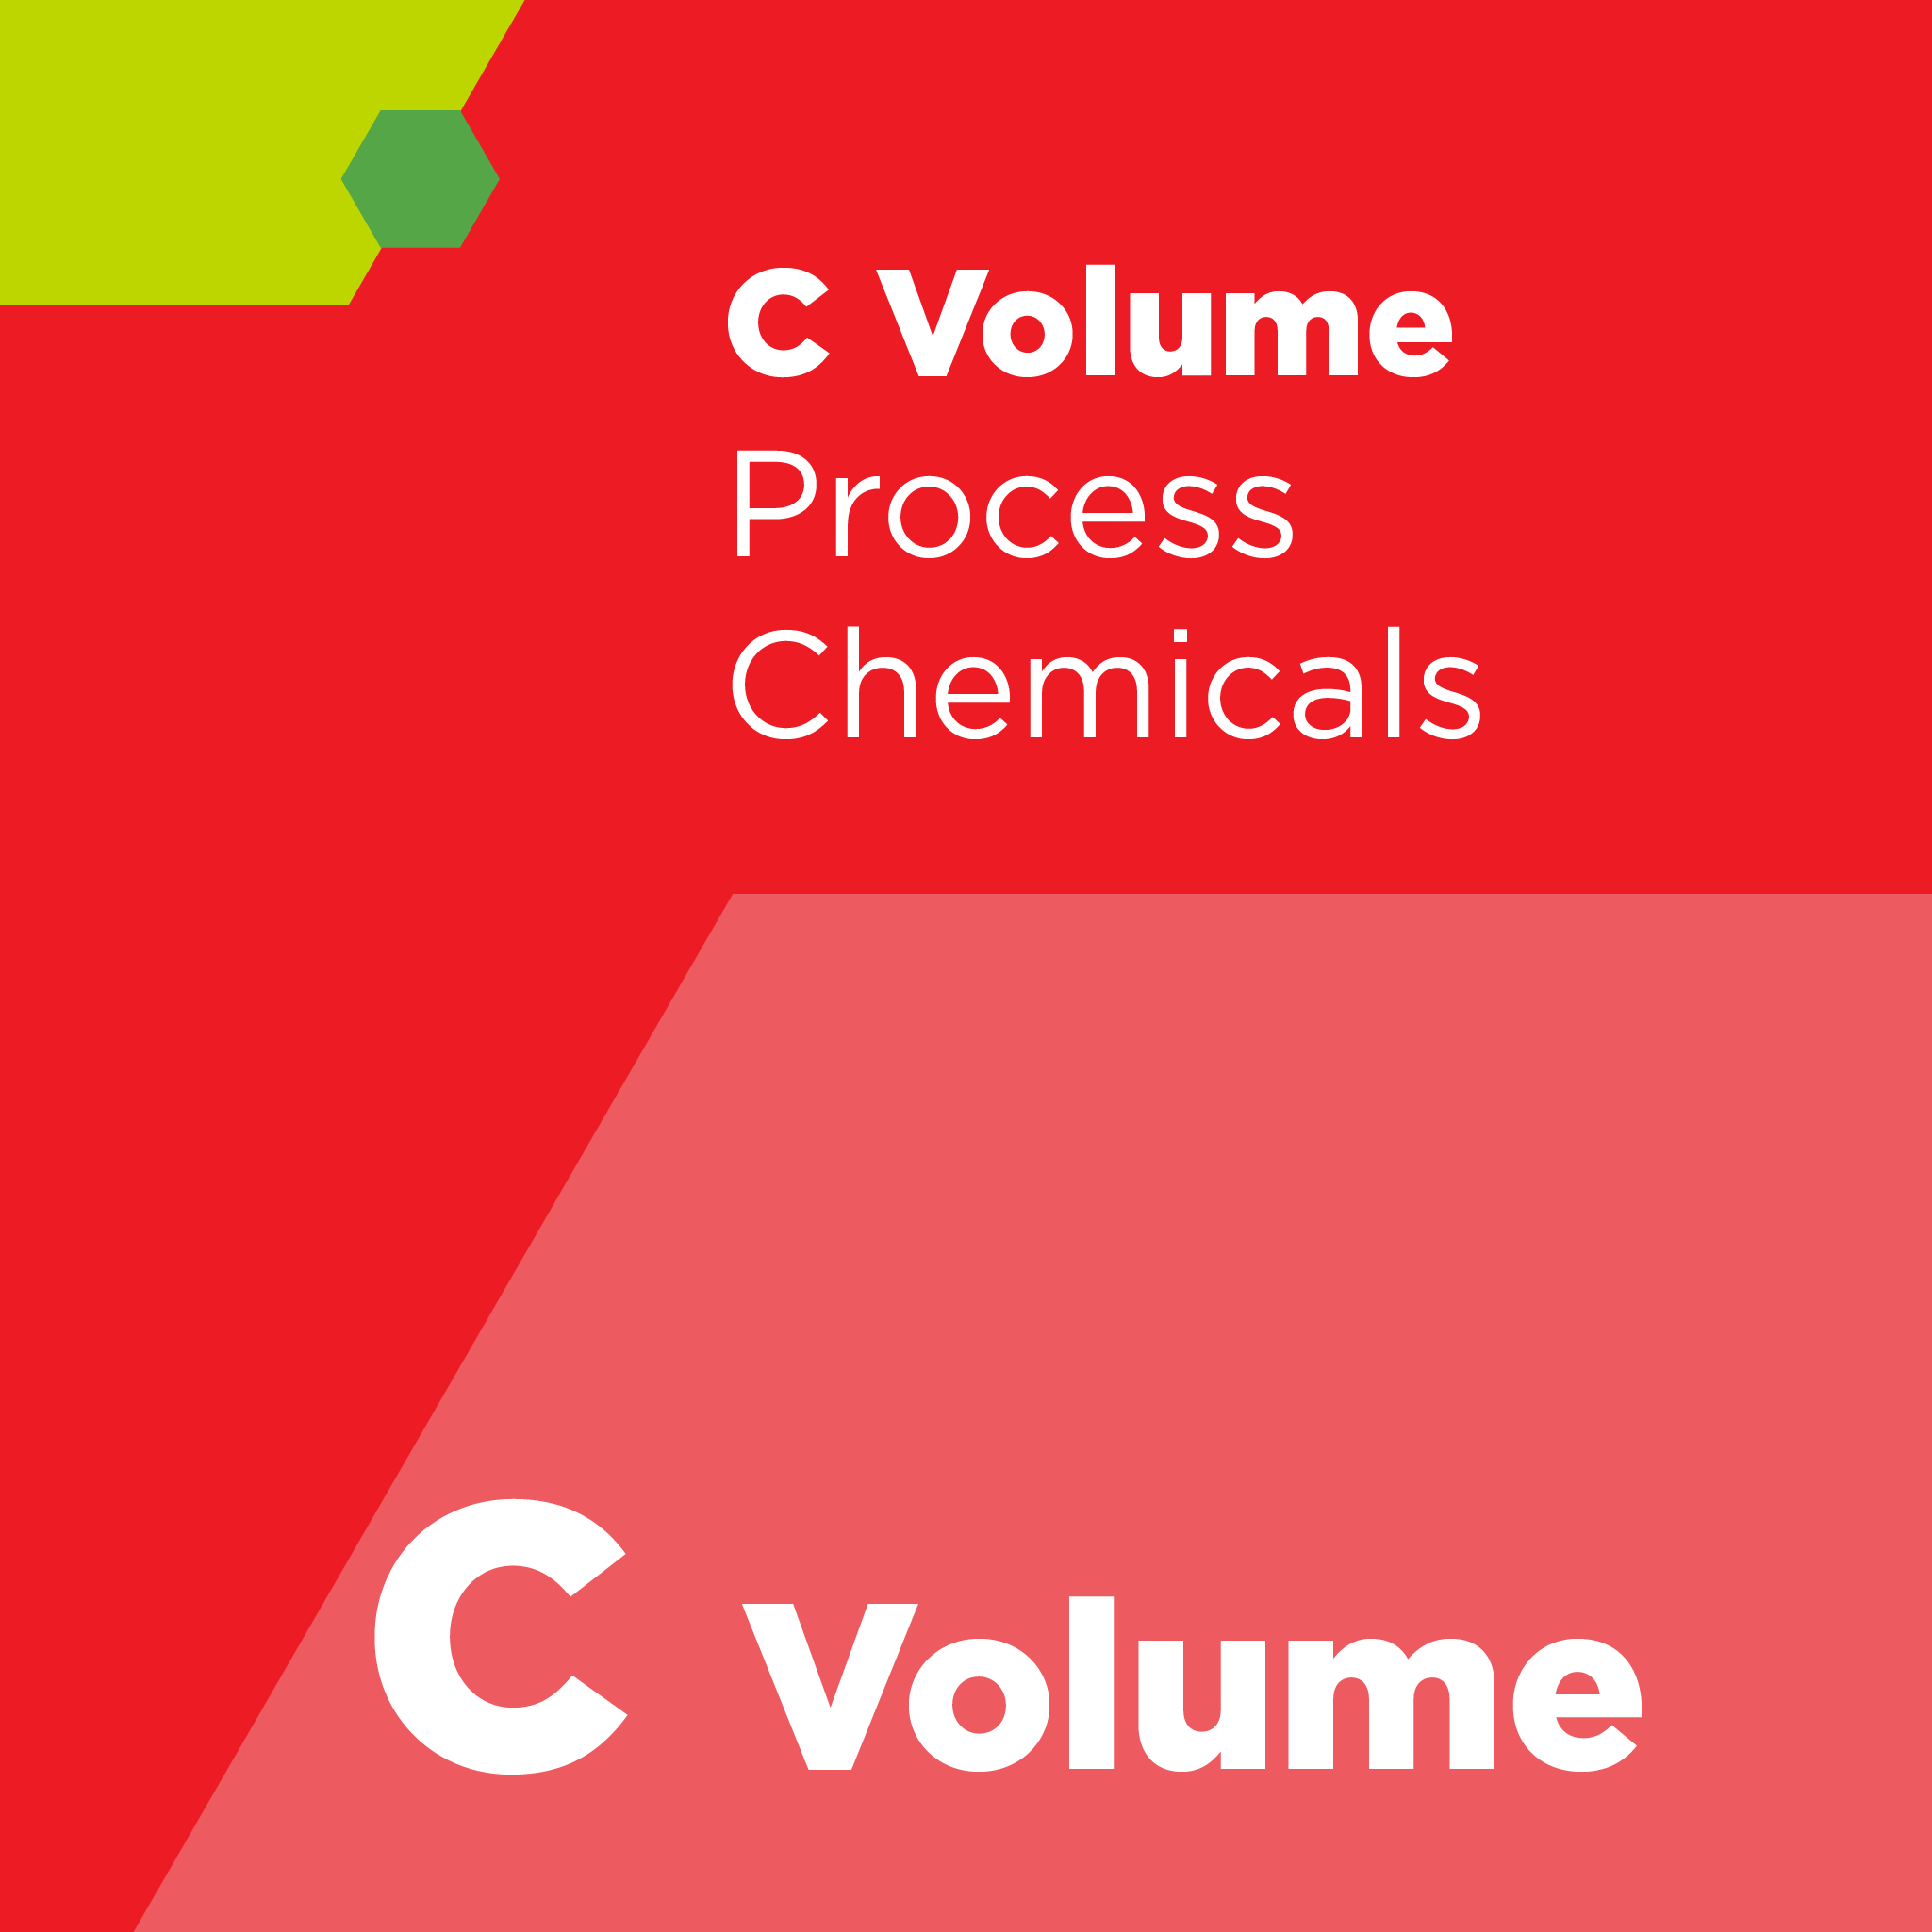 C04300 - SEMI C43 - Specification for Sodium Hydroxide, 50% Solution